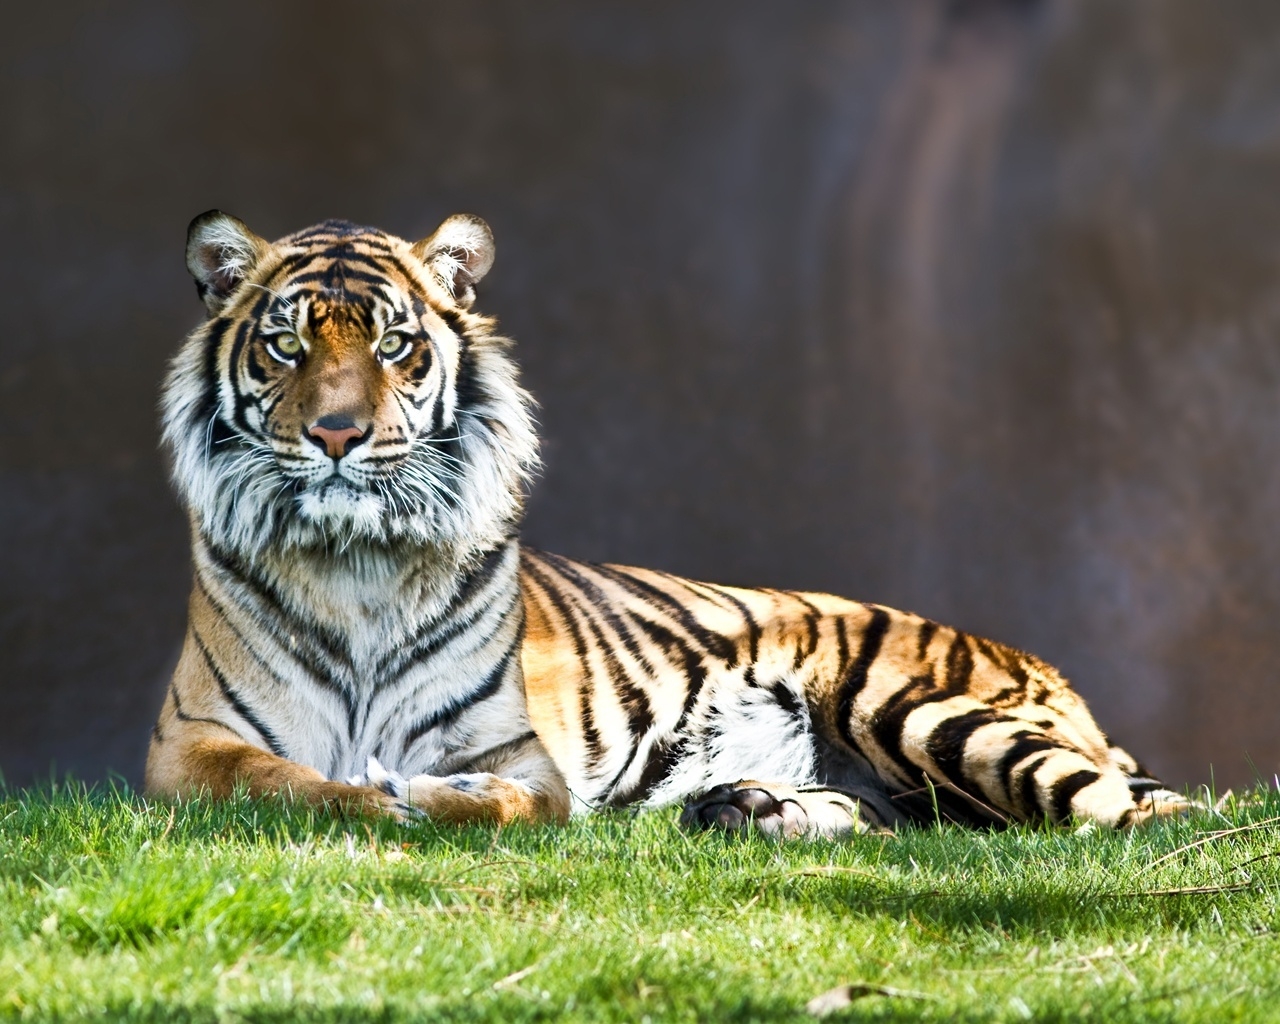 Tiger Thinking for 1280 x 1024 resolution